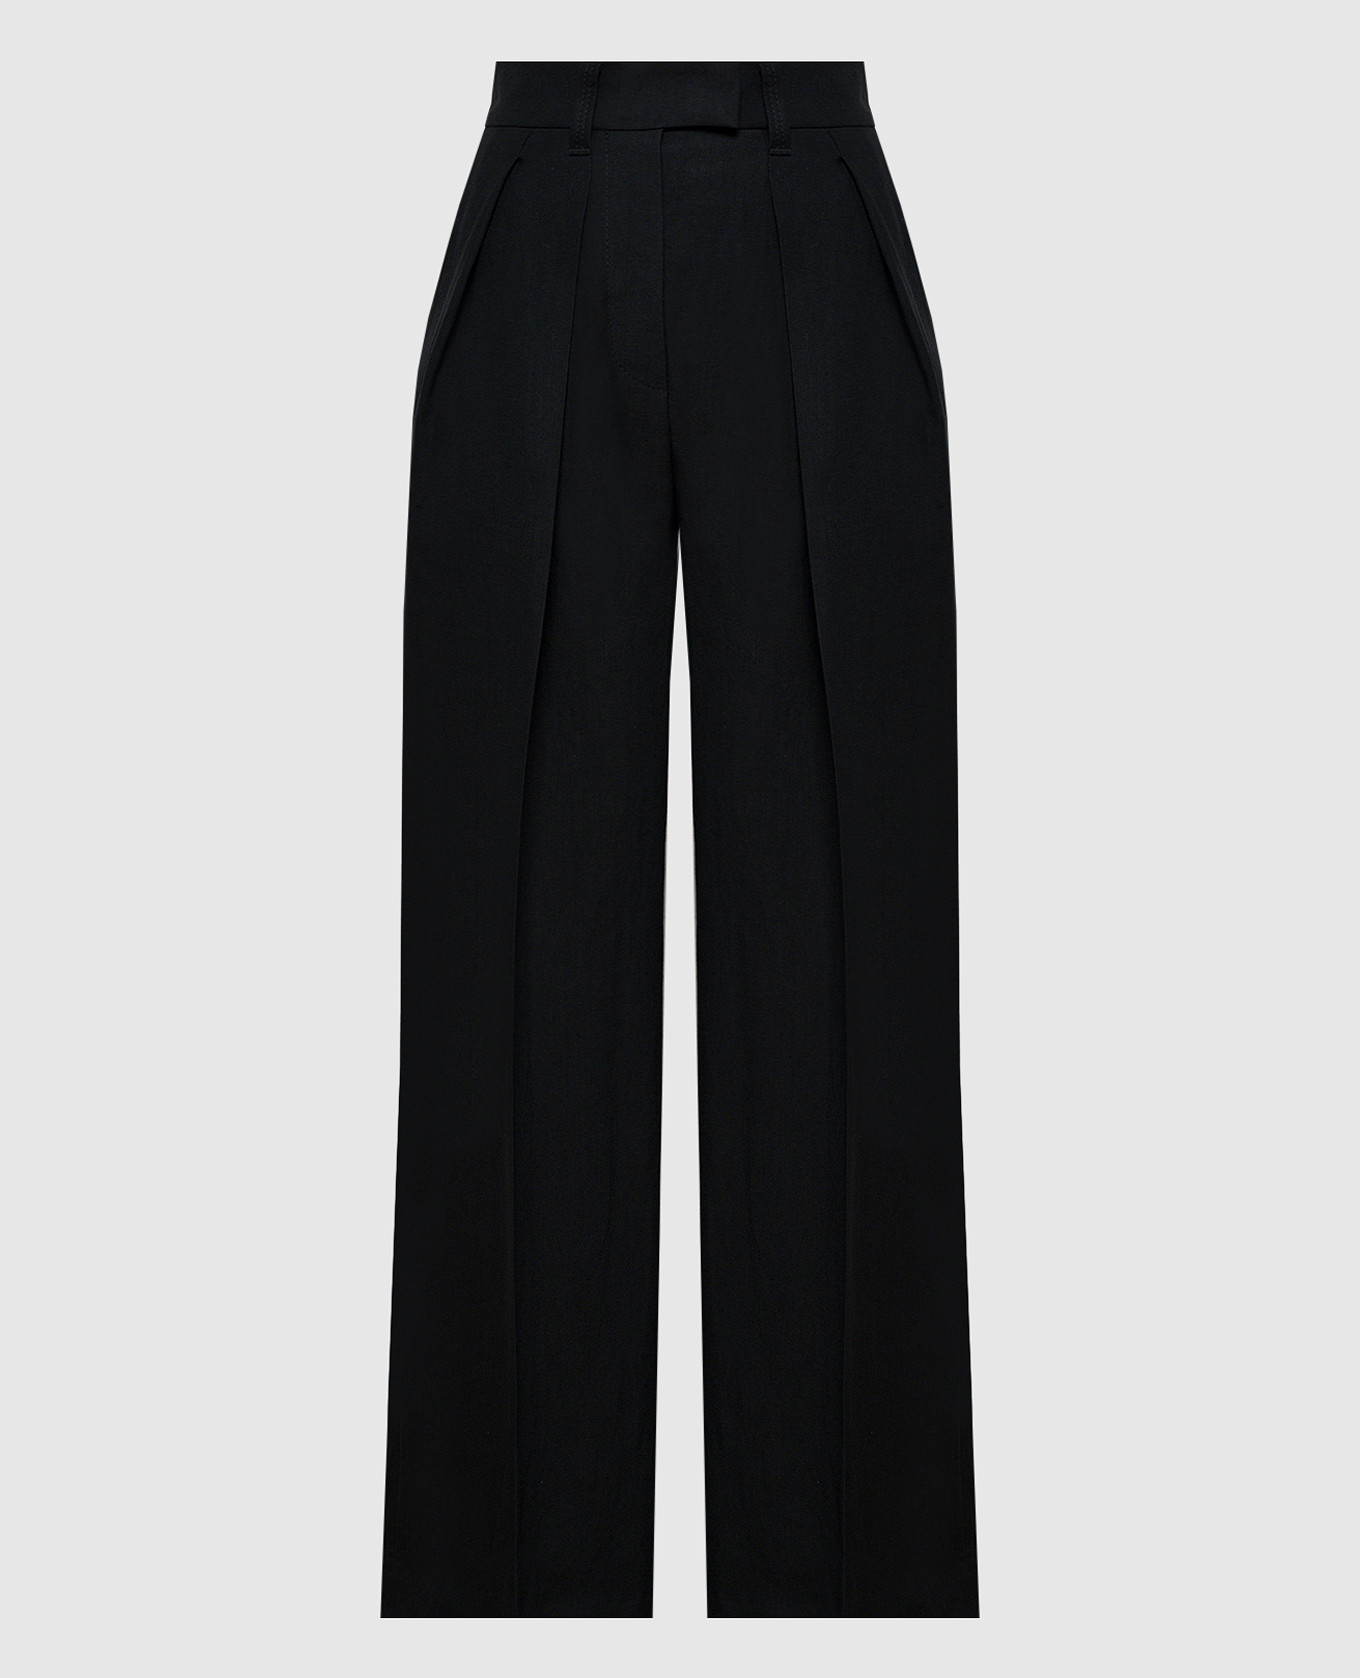 Black pants with linen